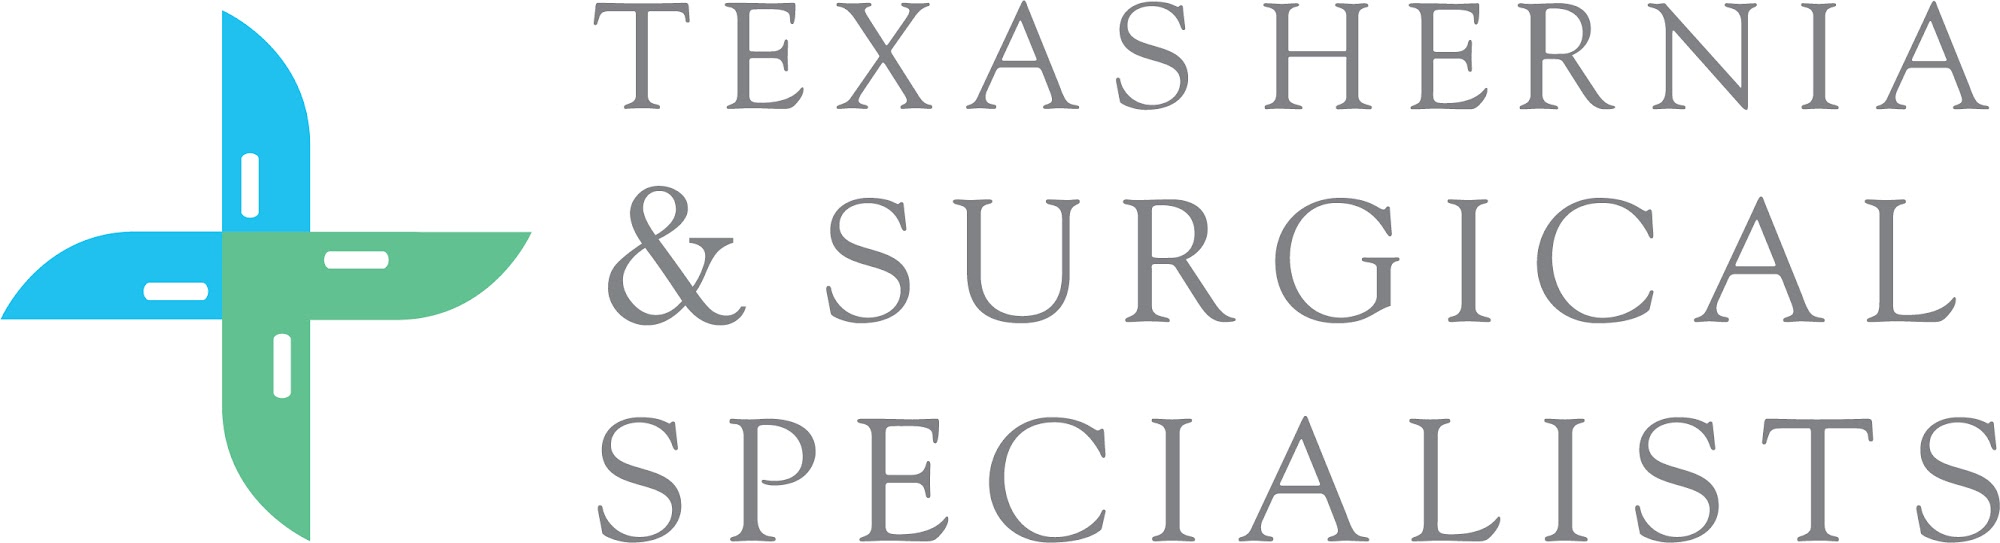 Texas Hernia & Surgical Specialists 134 Vision Park Blvd Suite 130, The Woodlands, TX 77384